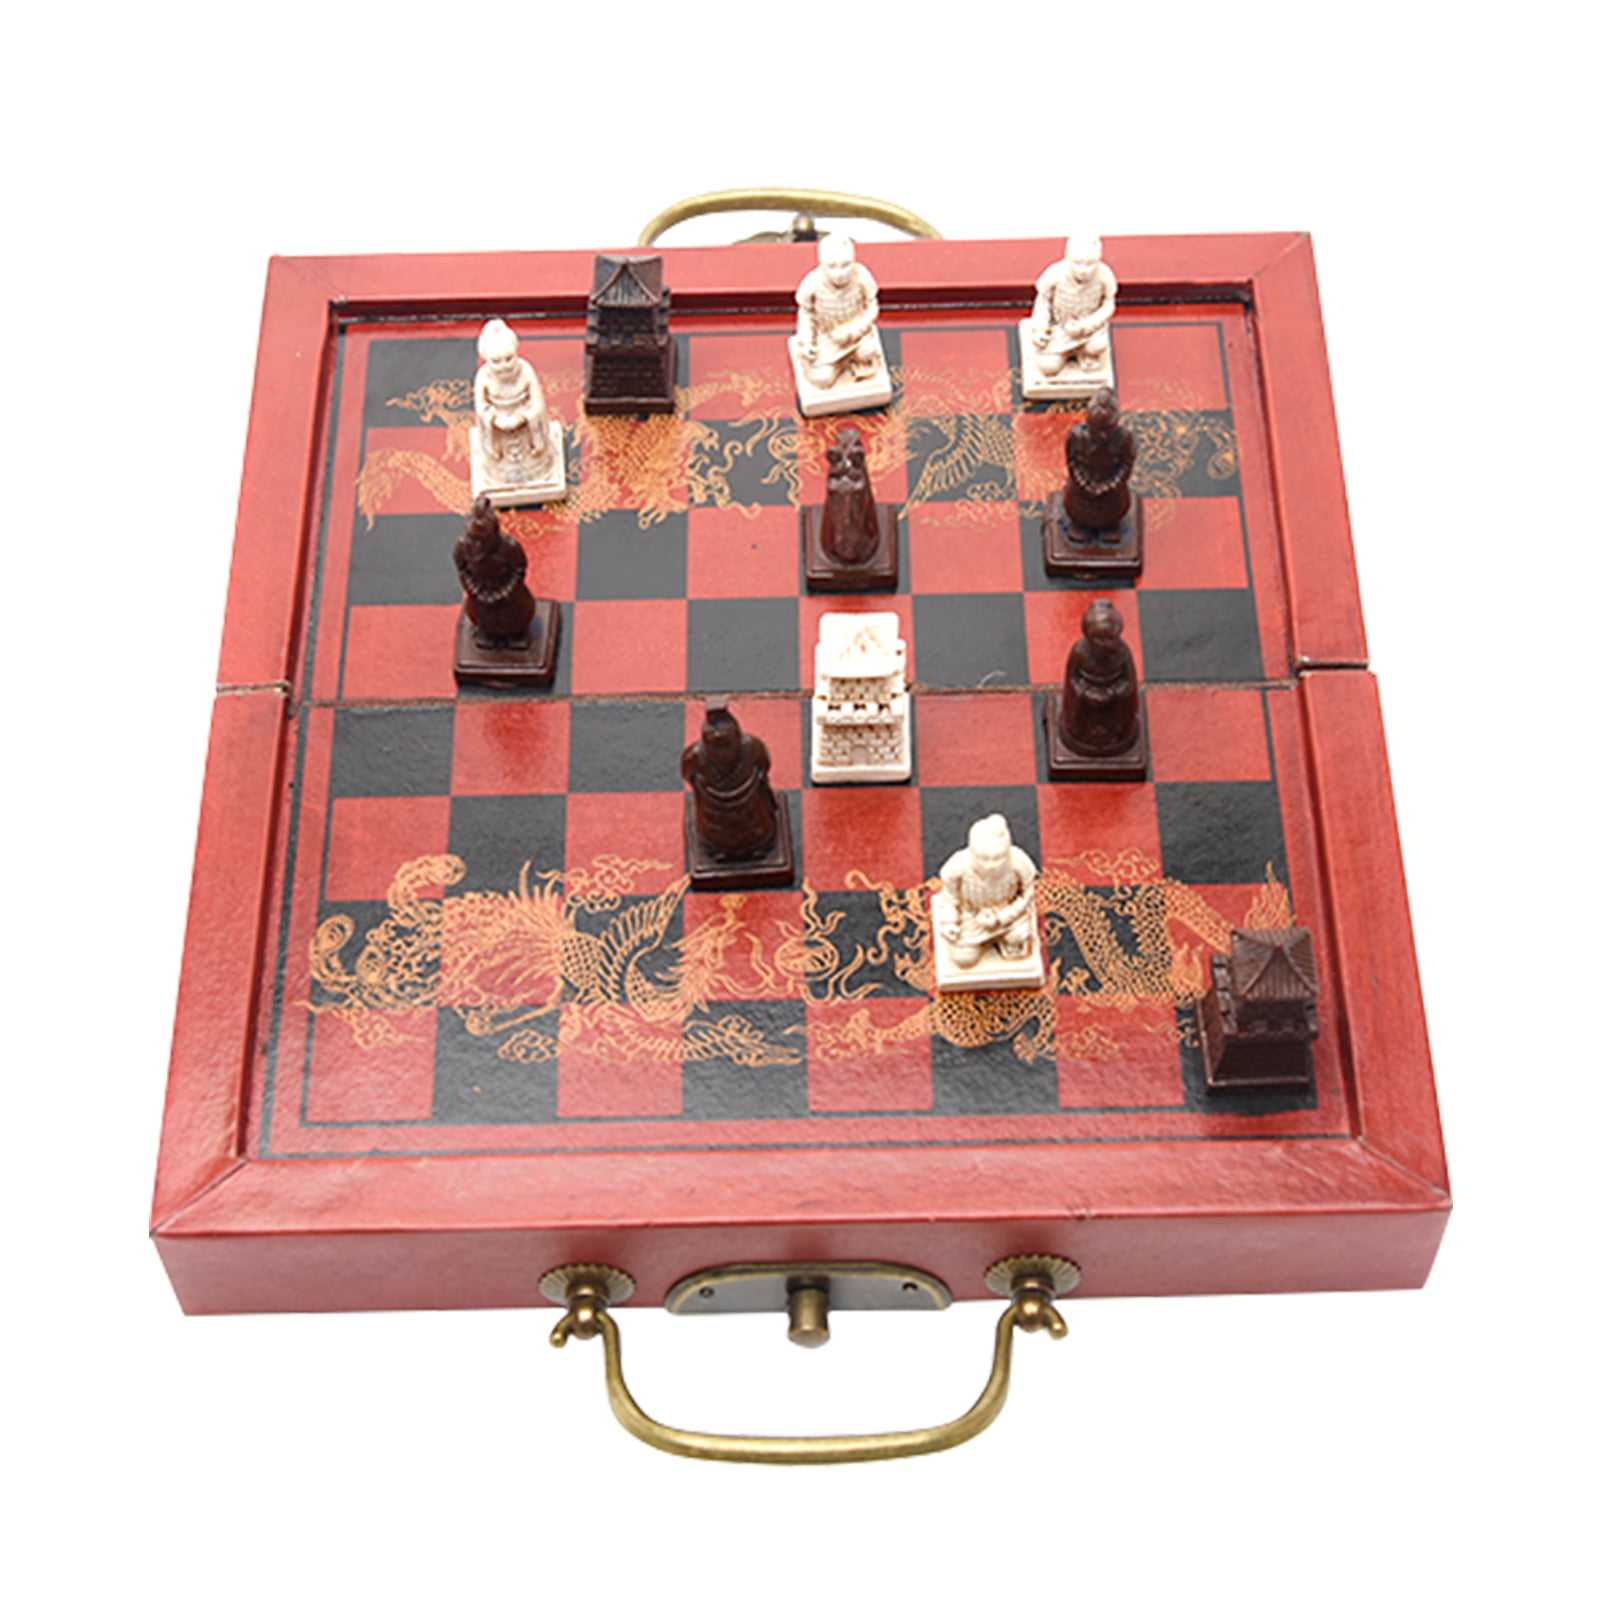 1Pc I-Go Chess Board Chessboard Folding Foldable for Chess Entertainment Toy 